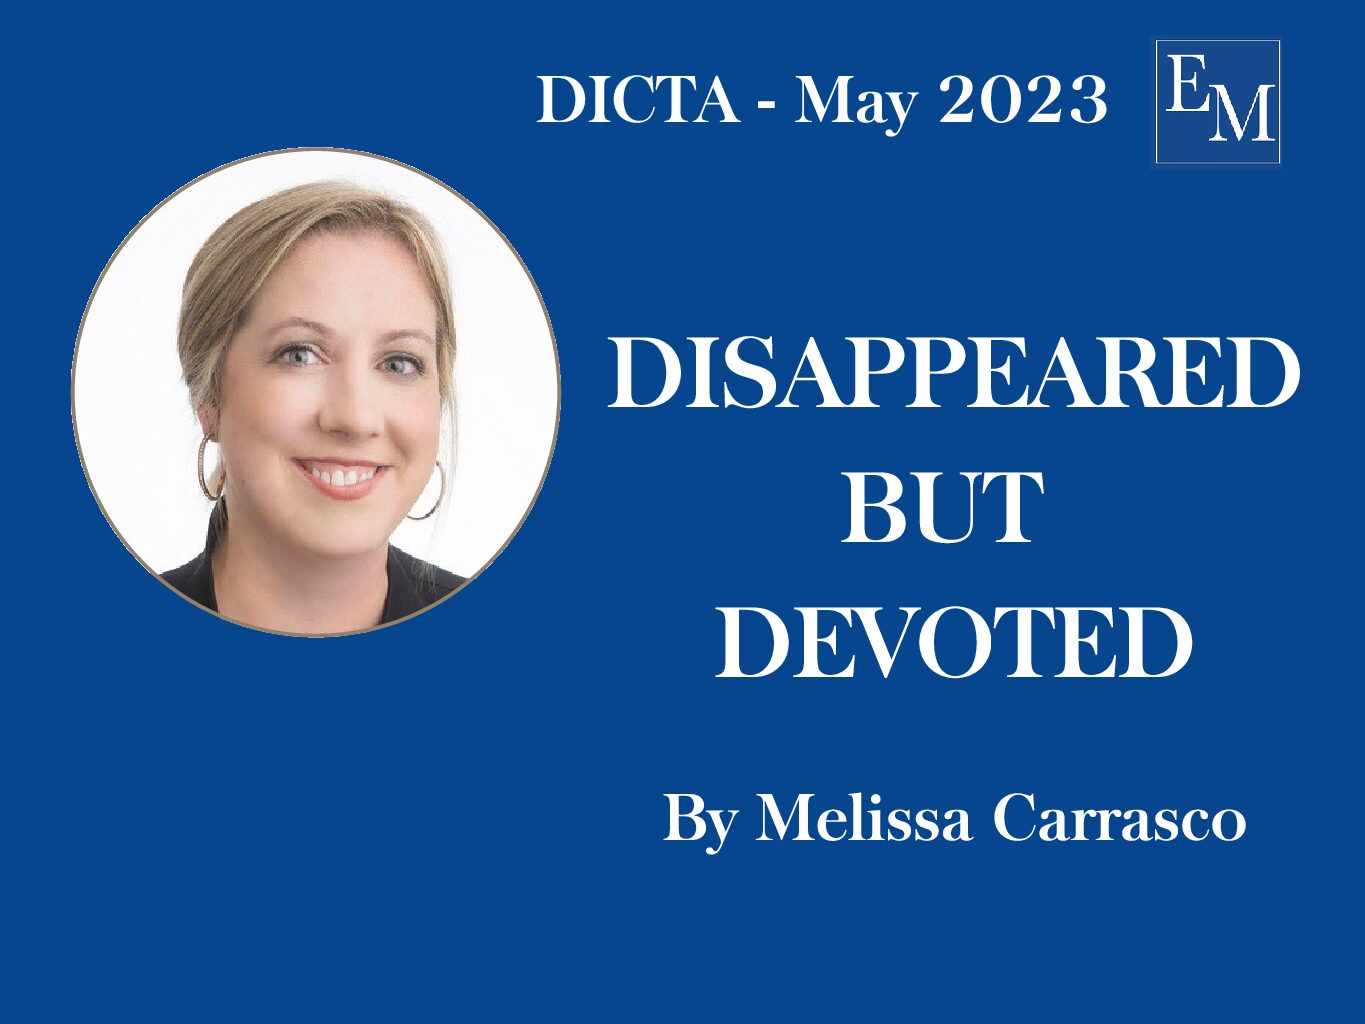 May DICTA Publication: DISAPPEARED BUT DEVOTED by Melissa Carrasco